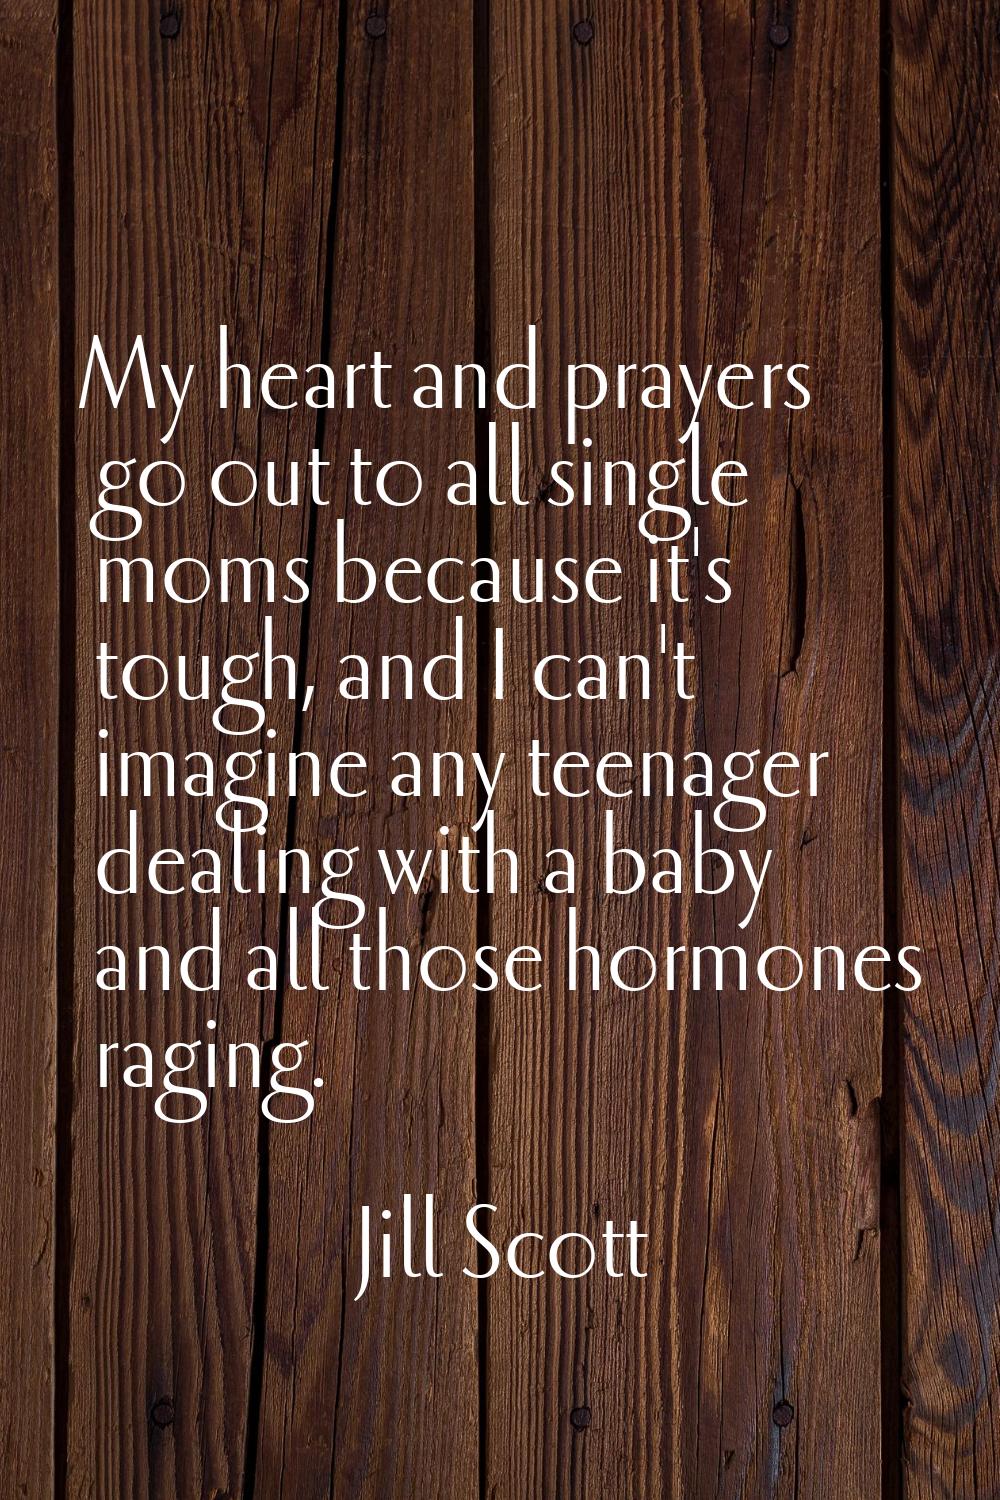 My heart and prayers go out to all single moms because it's tough, and I can't imagine any teenager